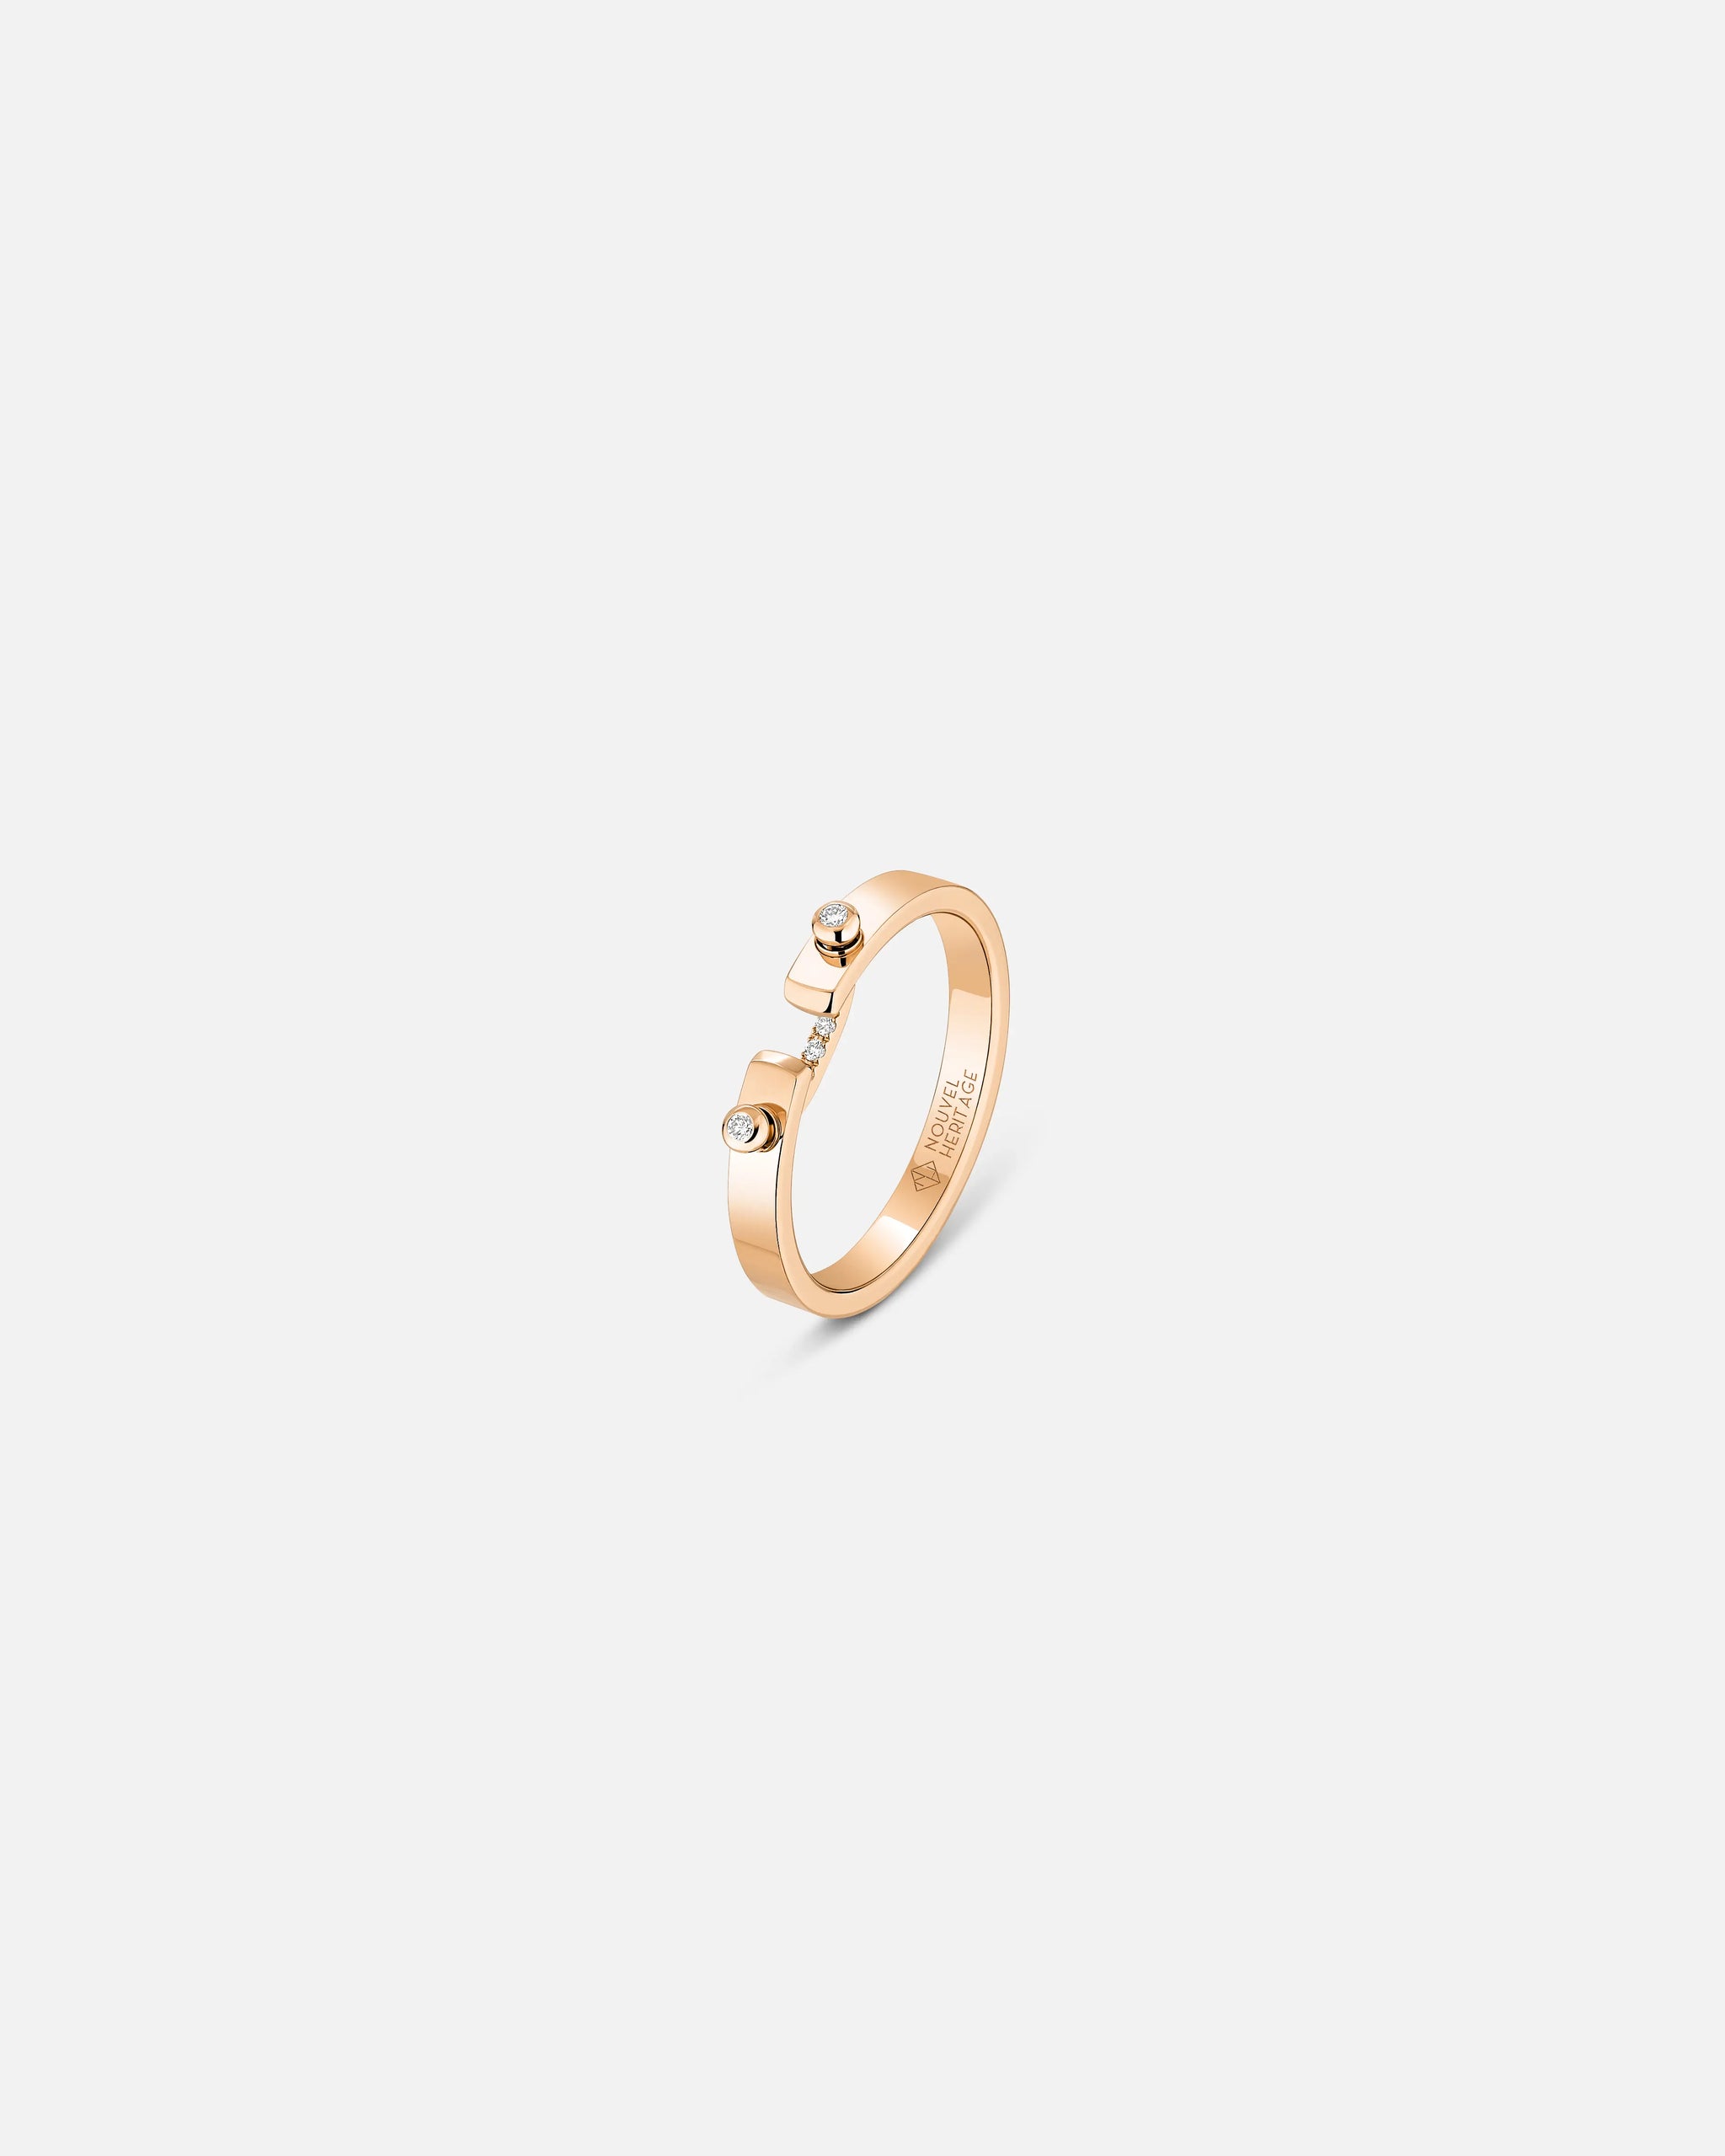 Business Meeting PM Mood Ring in Rose Gold - 1 - Nouvel Heritage